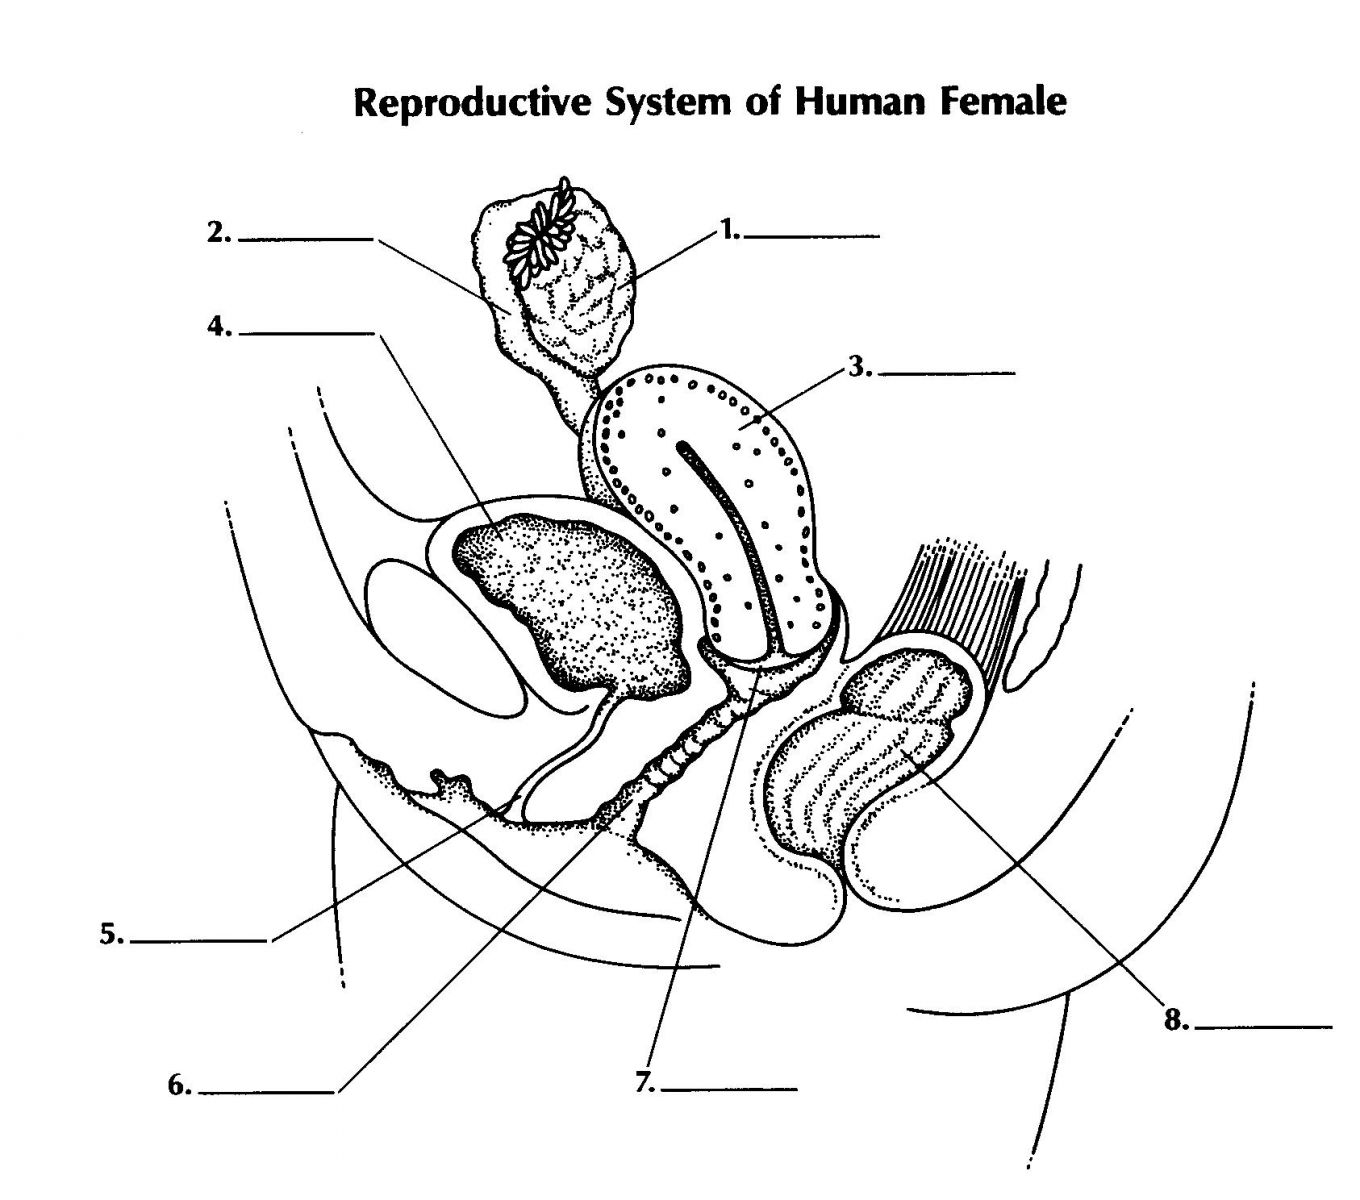 Reproductive System Of Female - ProProfs Quiz